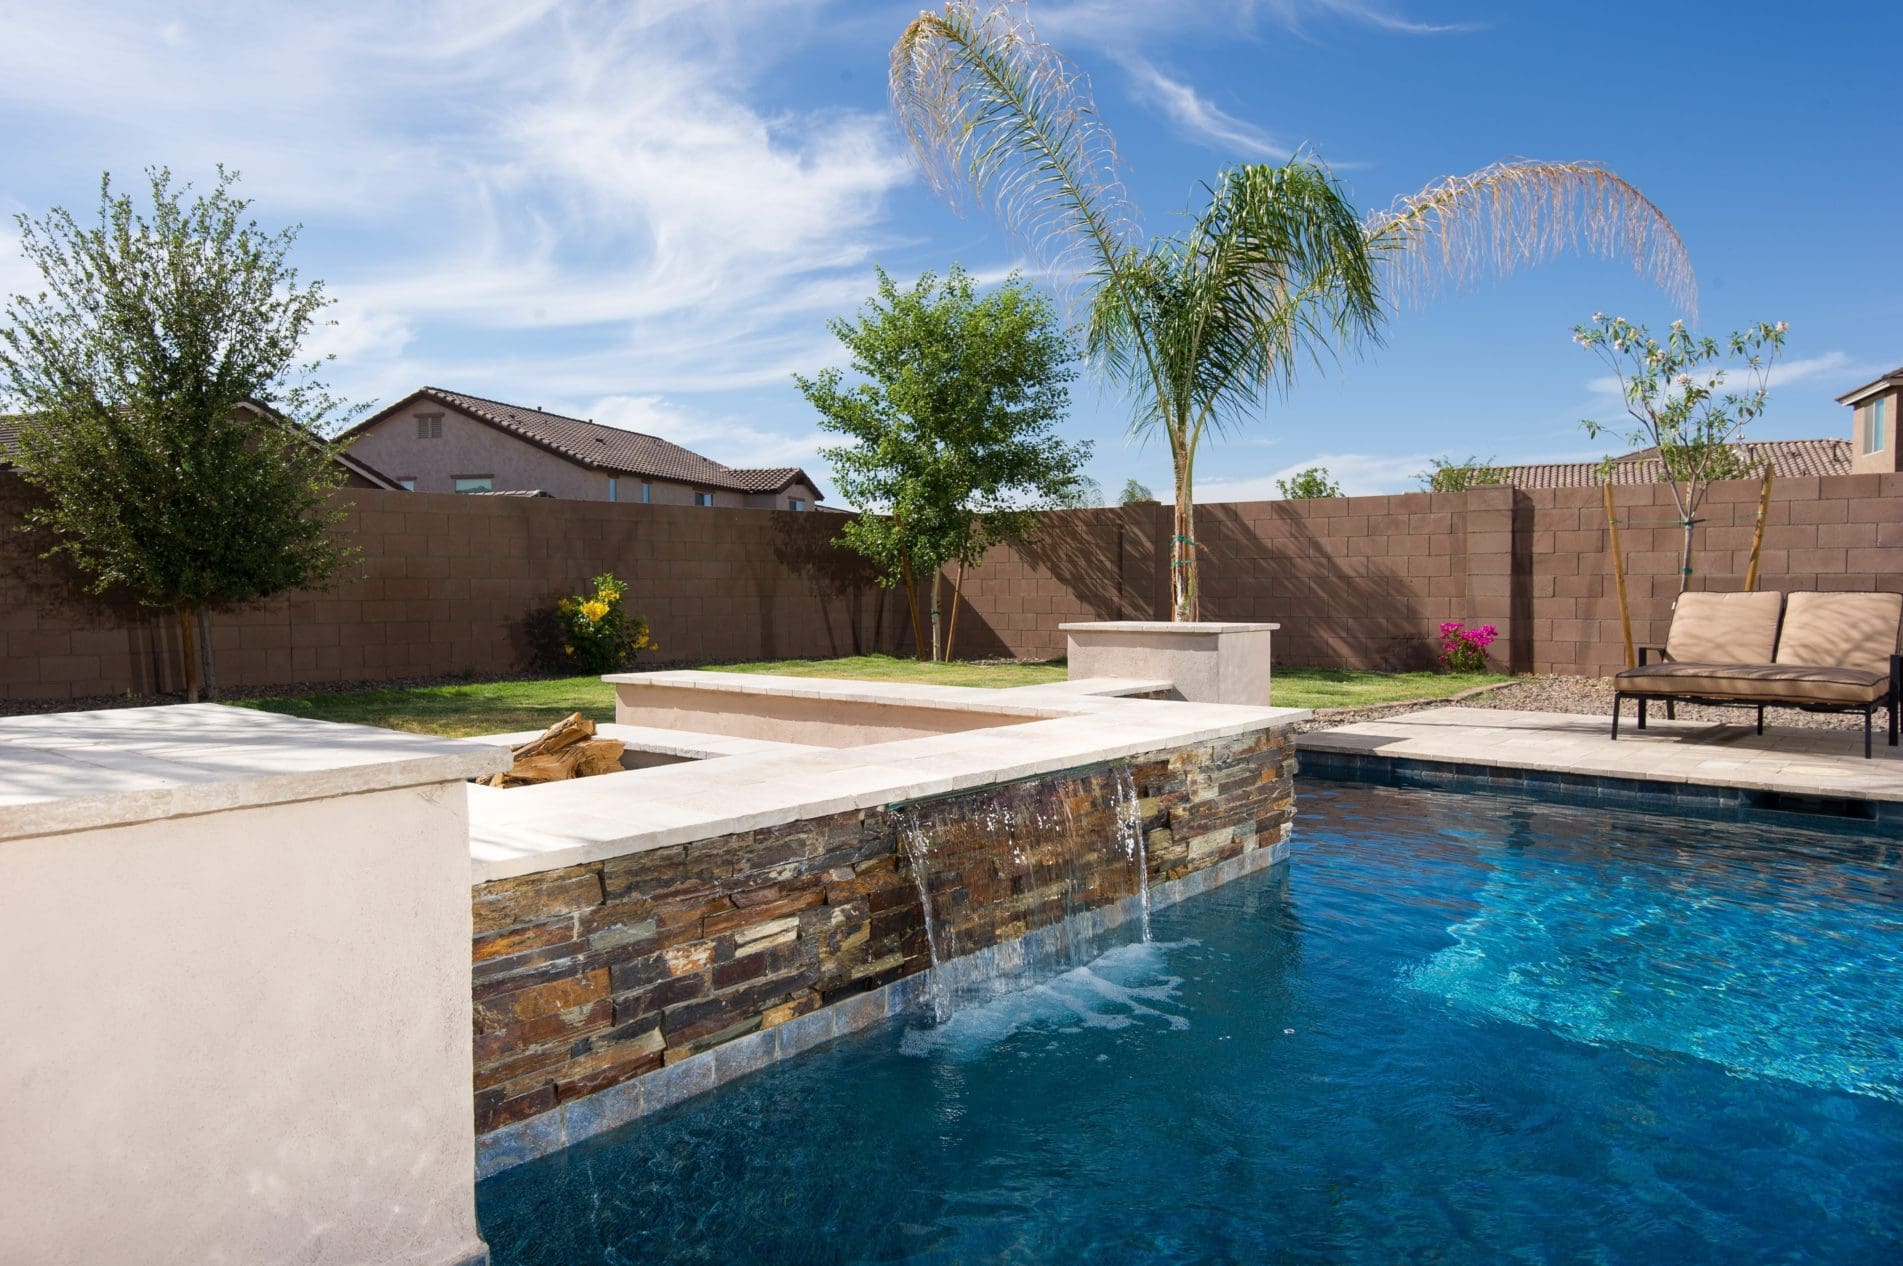 California Pools Not Affected in Drain Recall